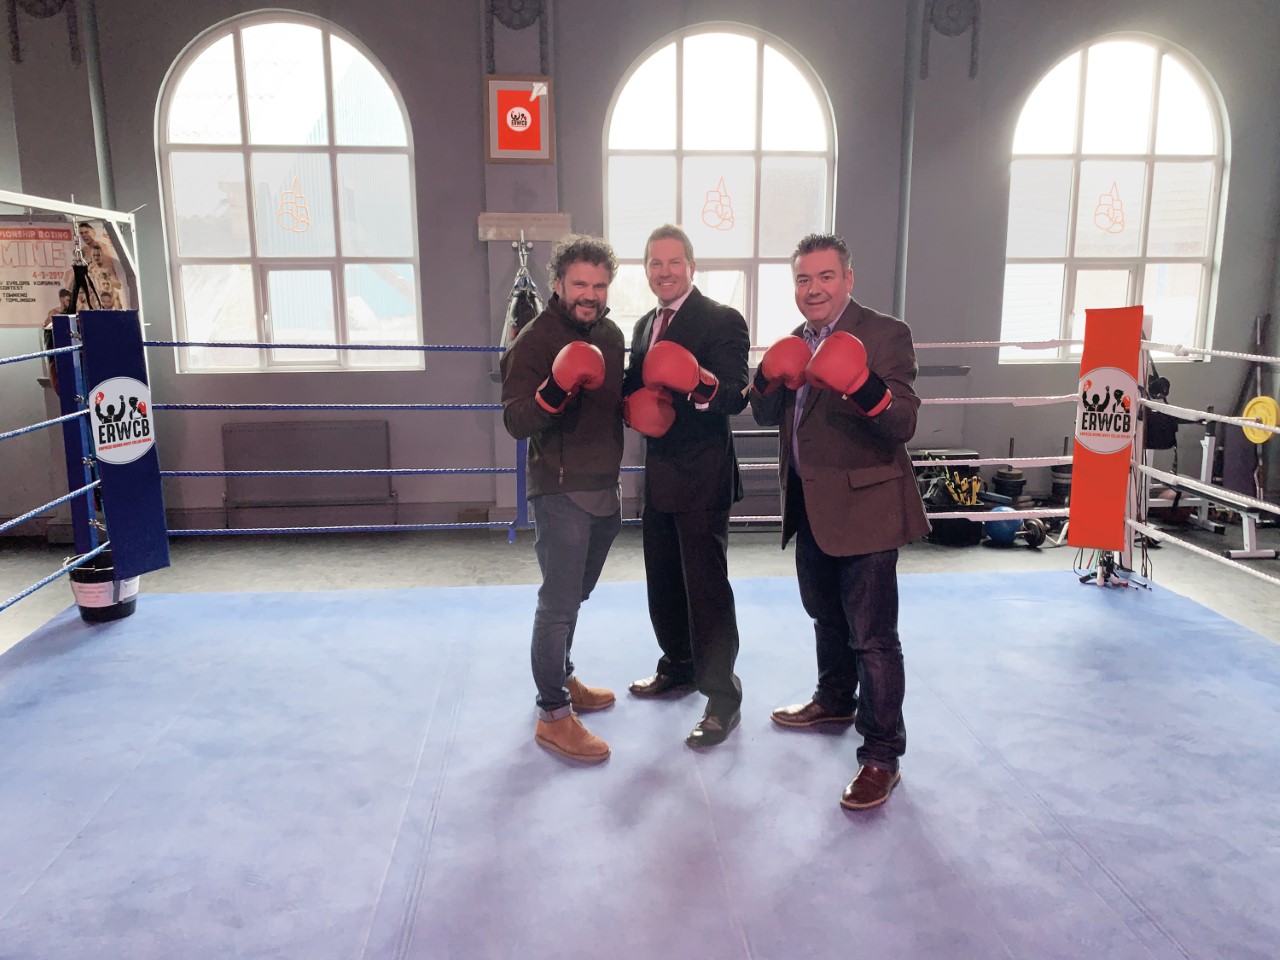 Charity Boxing Event Collared for Raising Funds